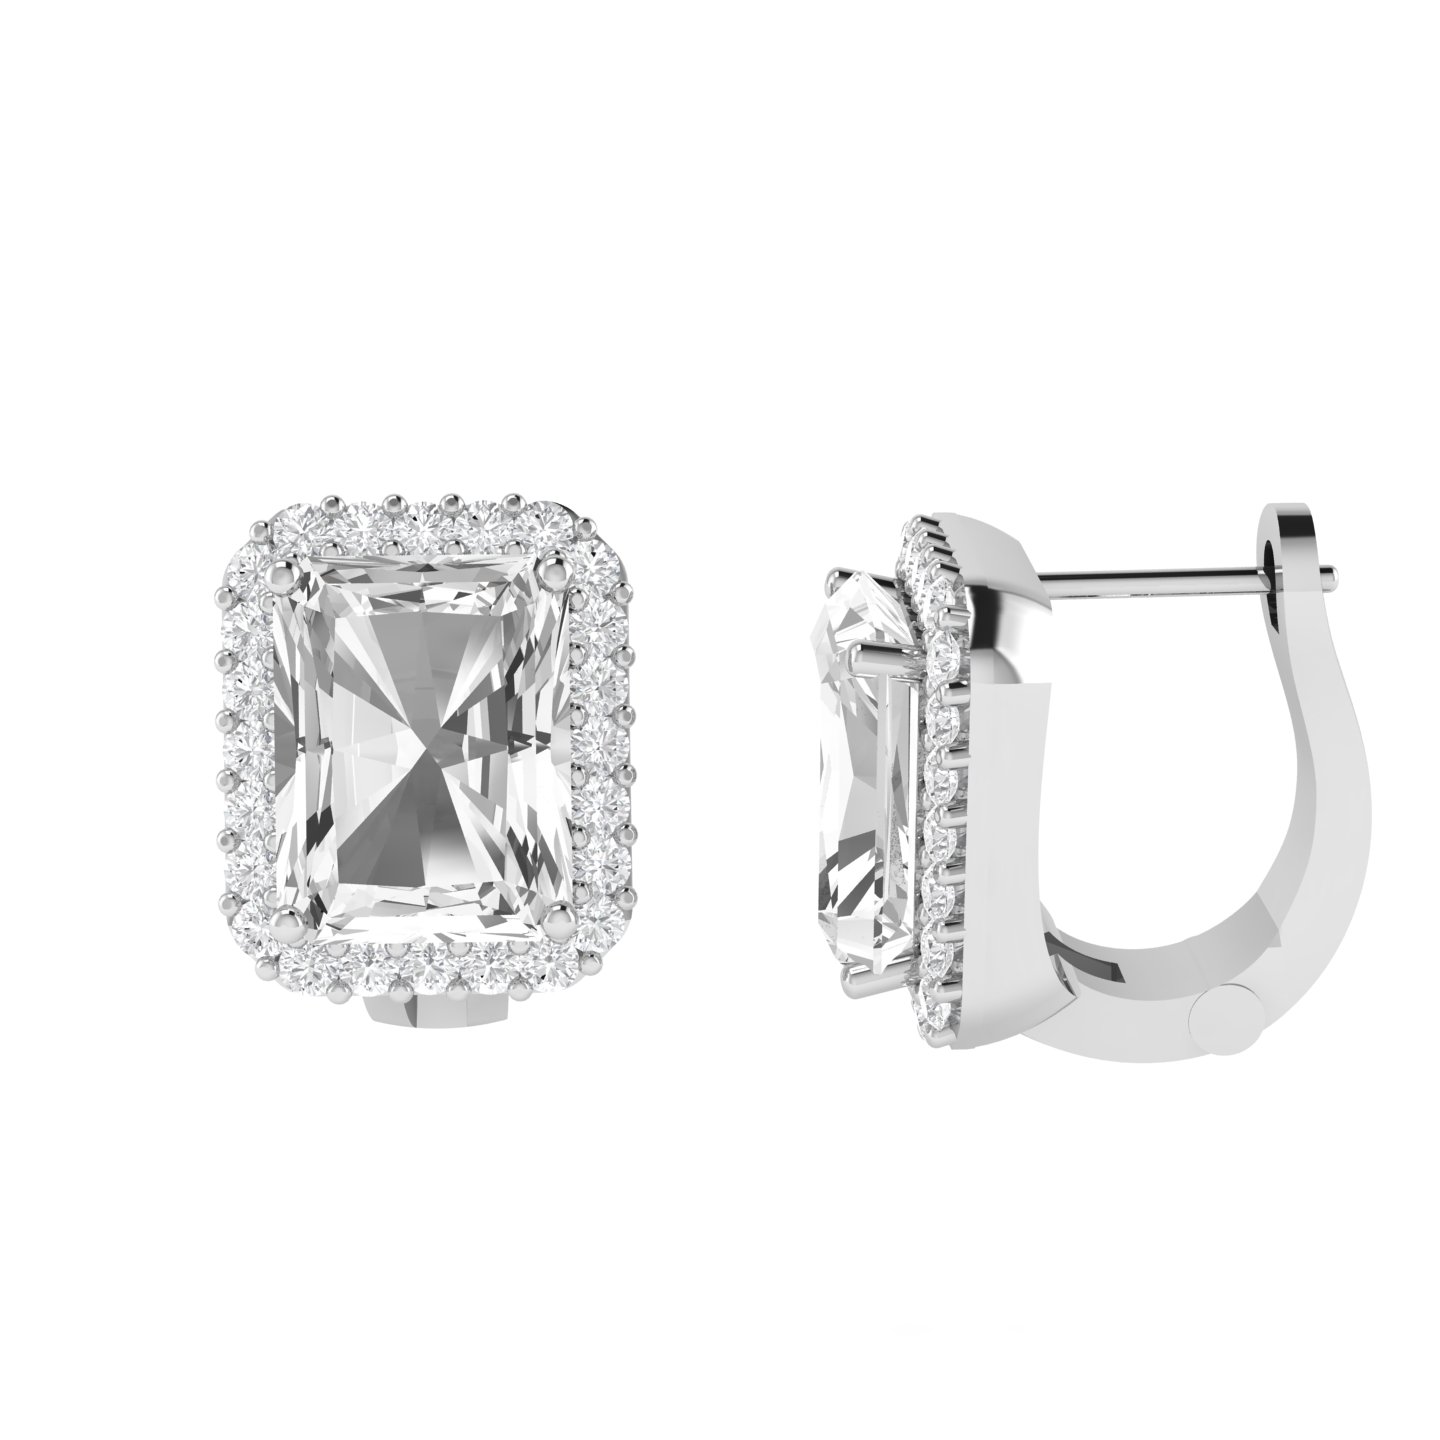 Diana Emerald  Cut White Topaz and Ablazing Diamond Earrings in 18K Gold (2ct)